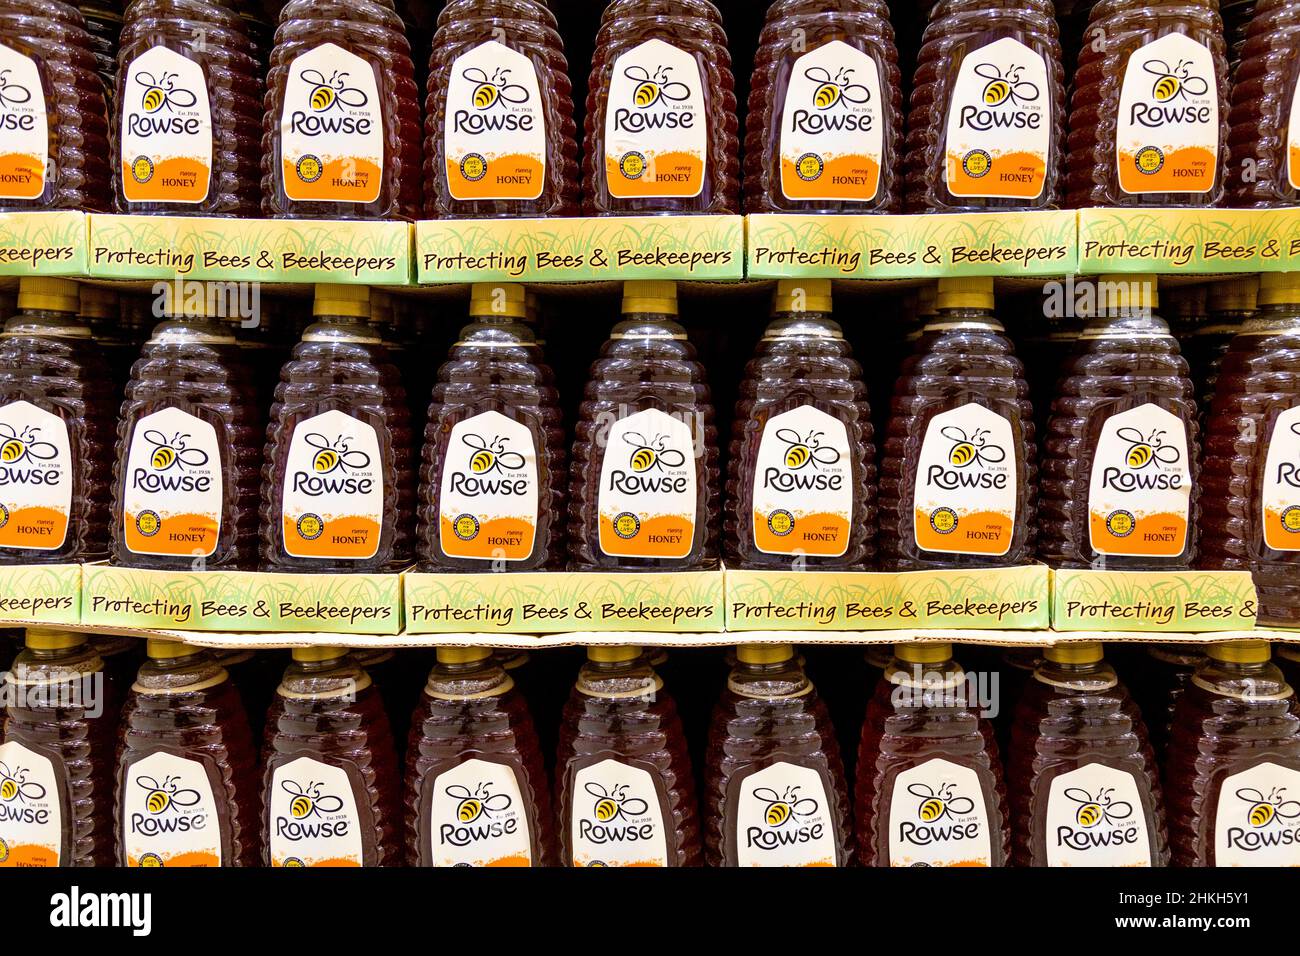 Bottles of runny Rowse Honey at a supermarket Stock Photo